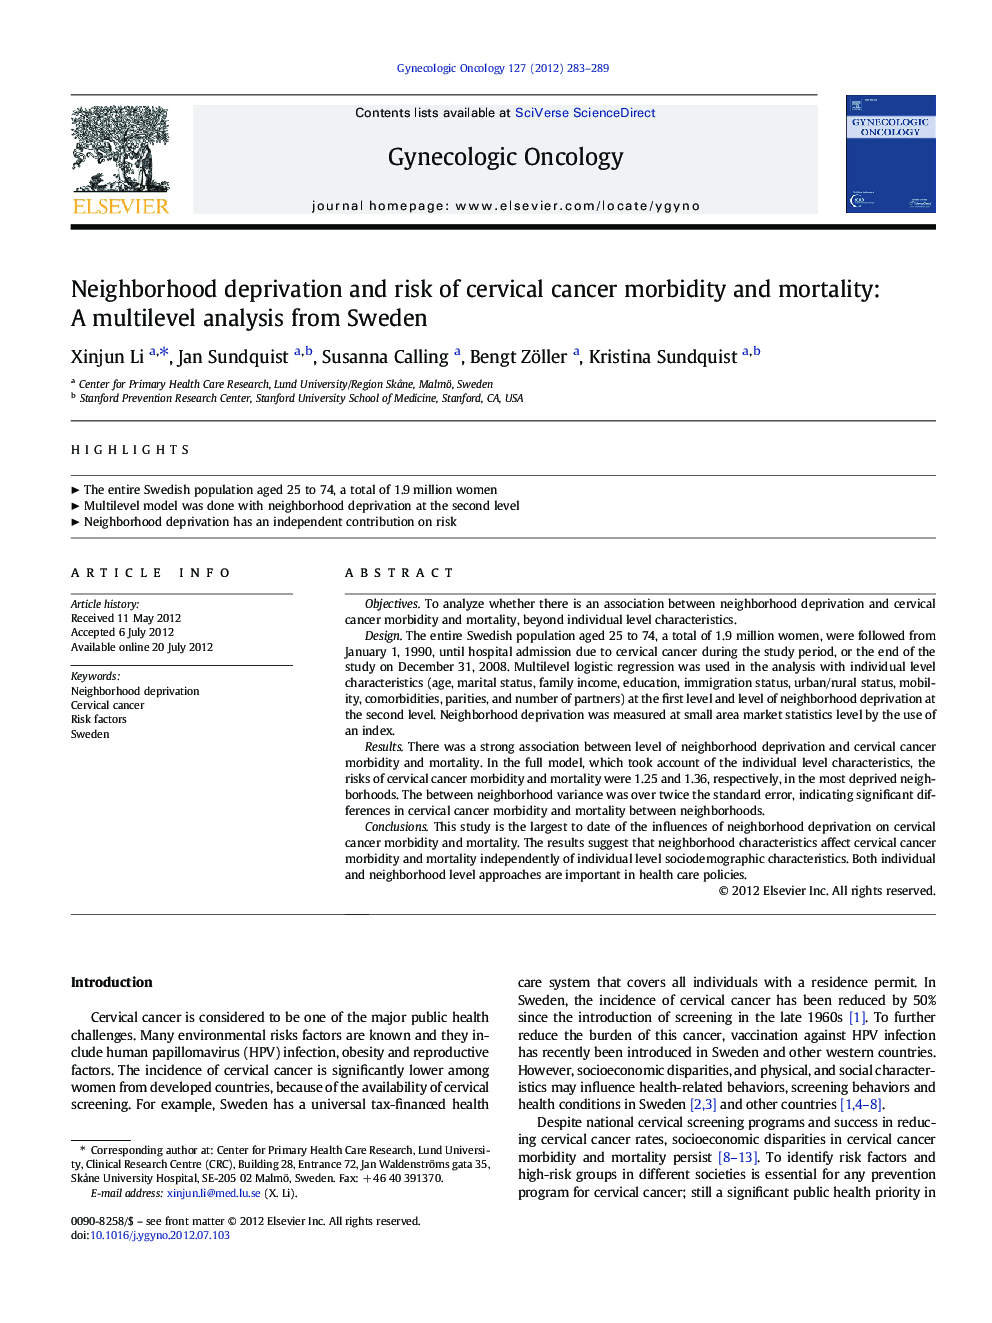 Neighborhood deprivation and risk of cervical cancer morbidity and mortality: A multilevel analysis from Sweden